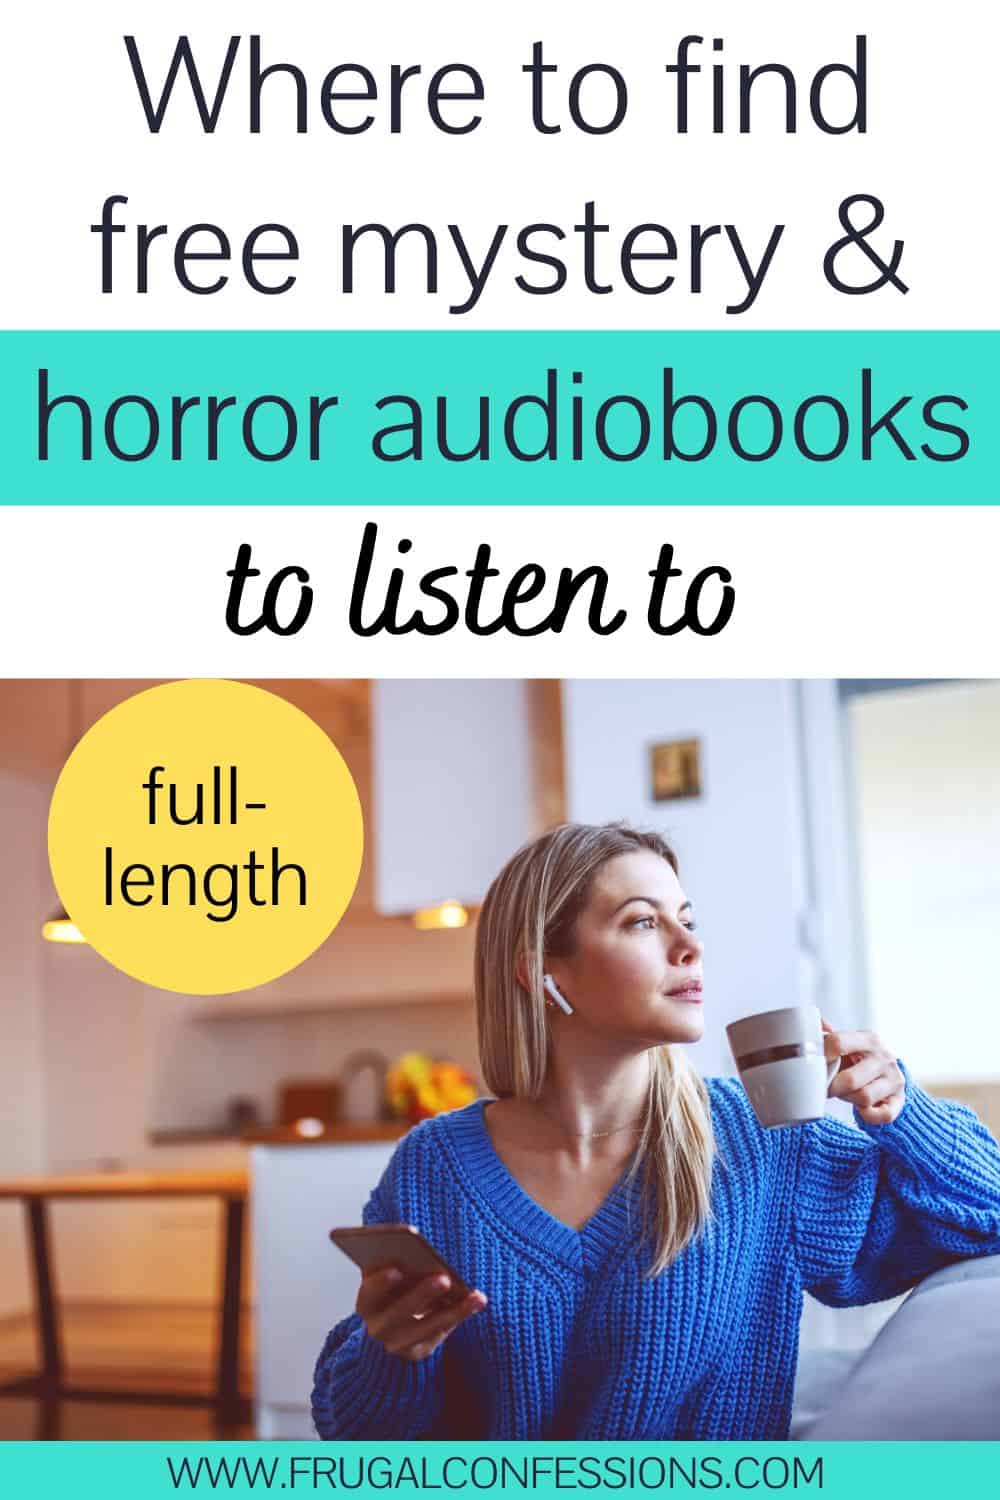 girl in blue sweater listening to horror audiobook on couch, text overlay 